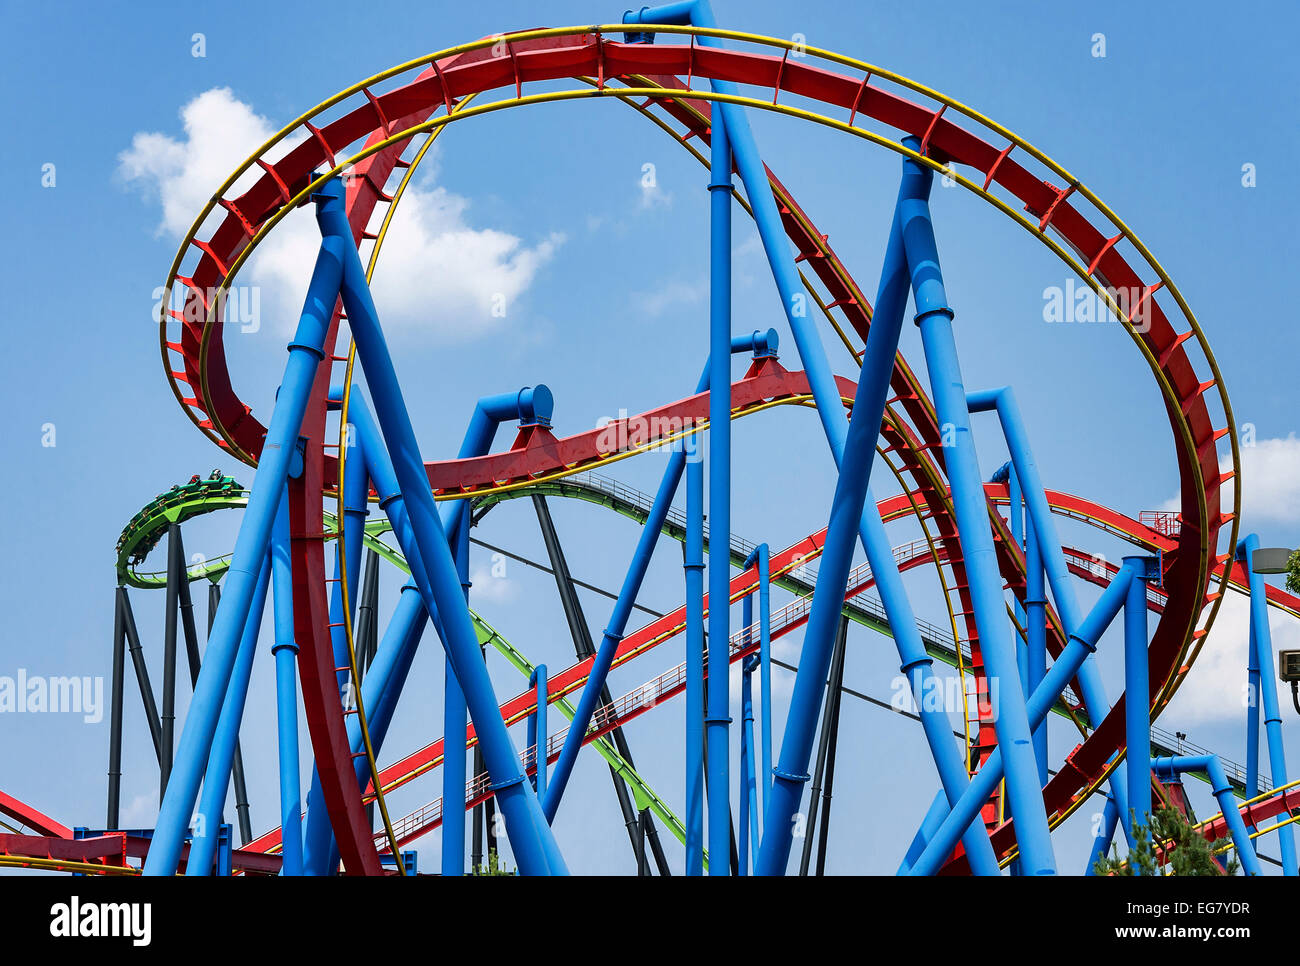 Roller coaster, Great Adventure, Six Flags, New Jersey, USA Stock Photo